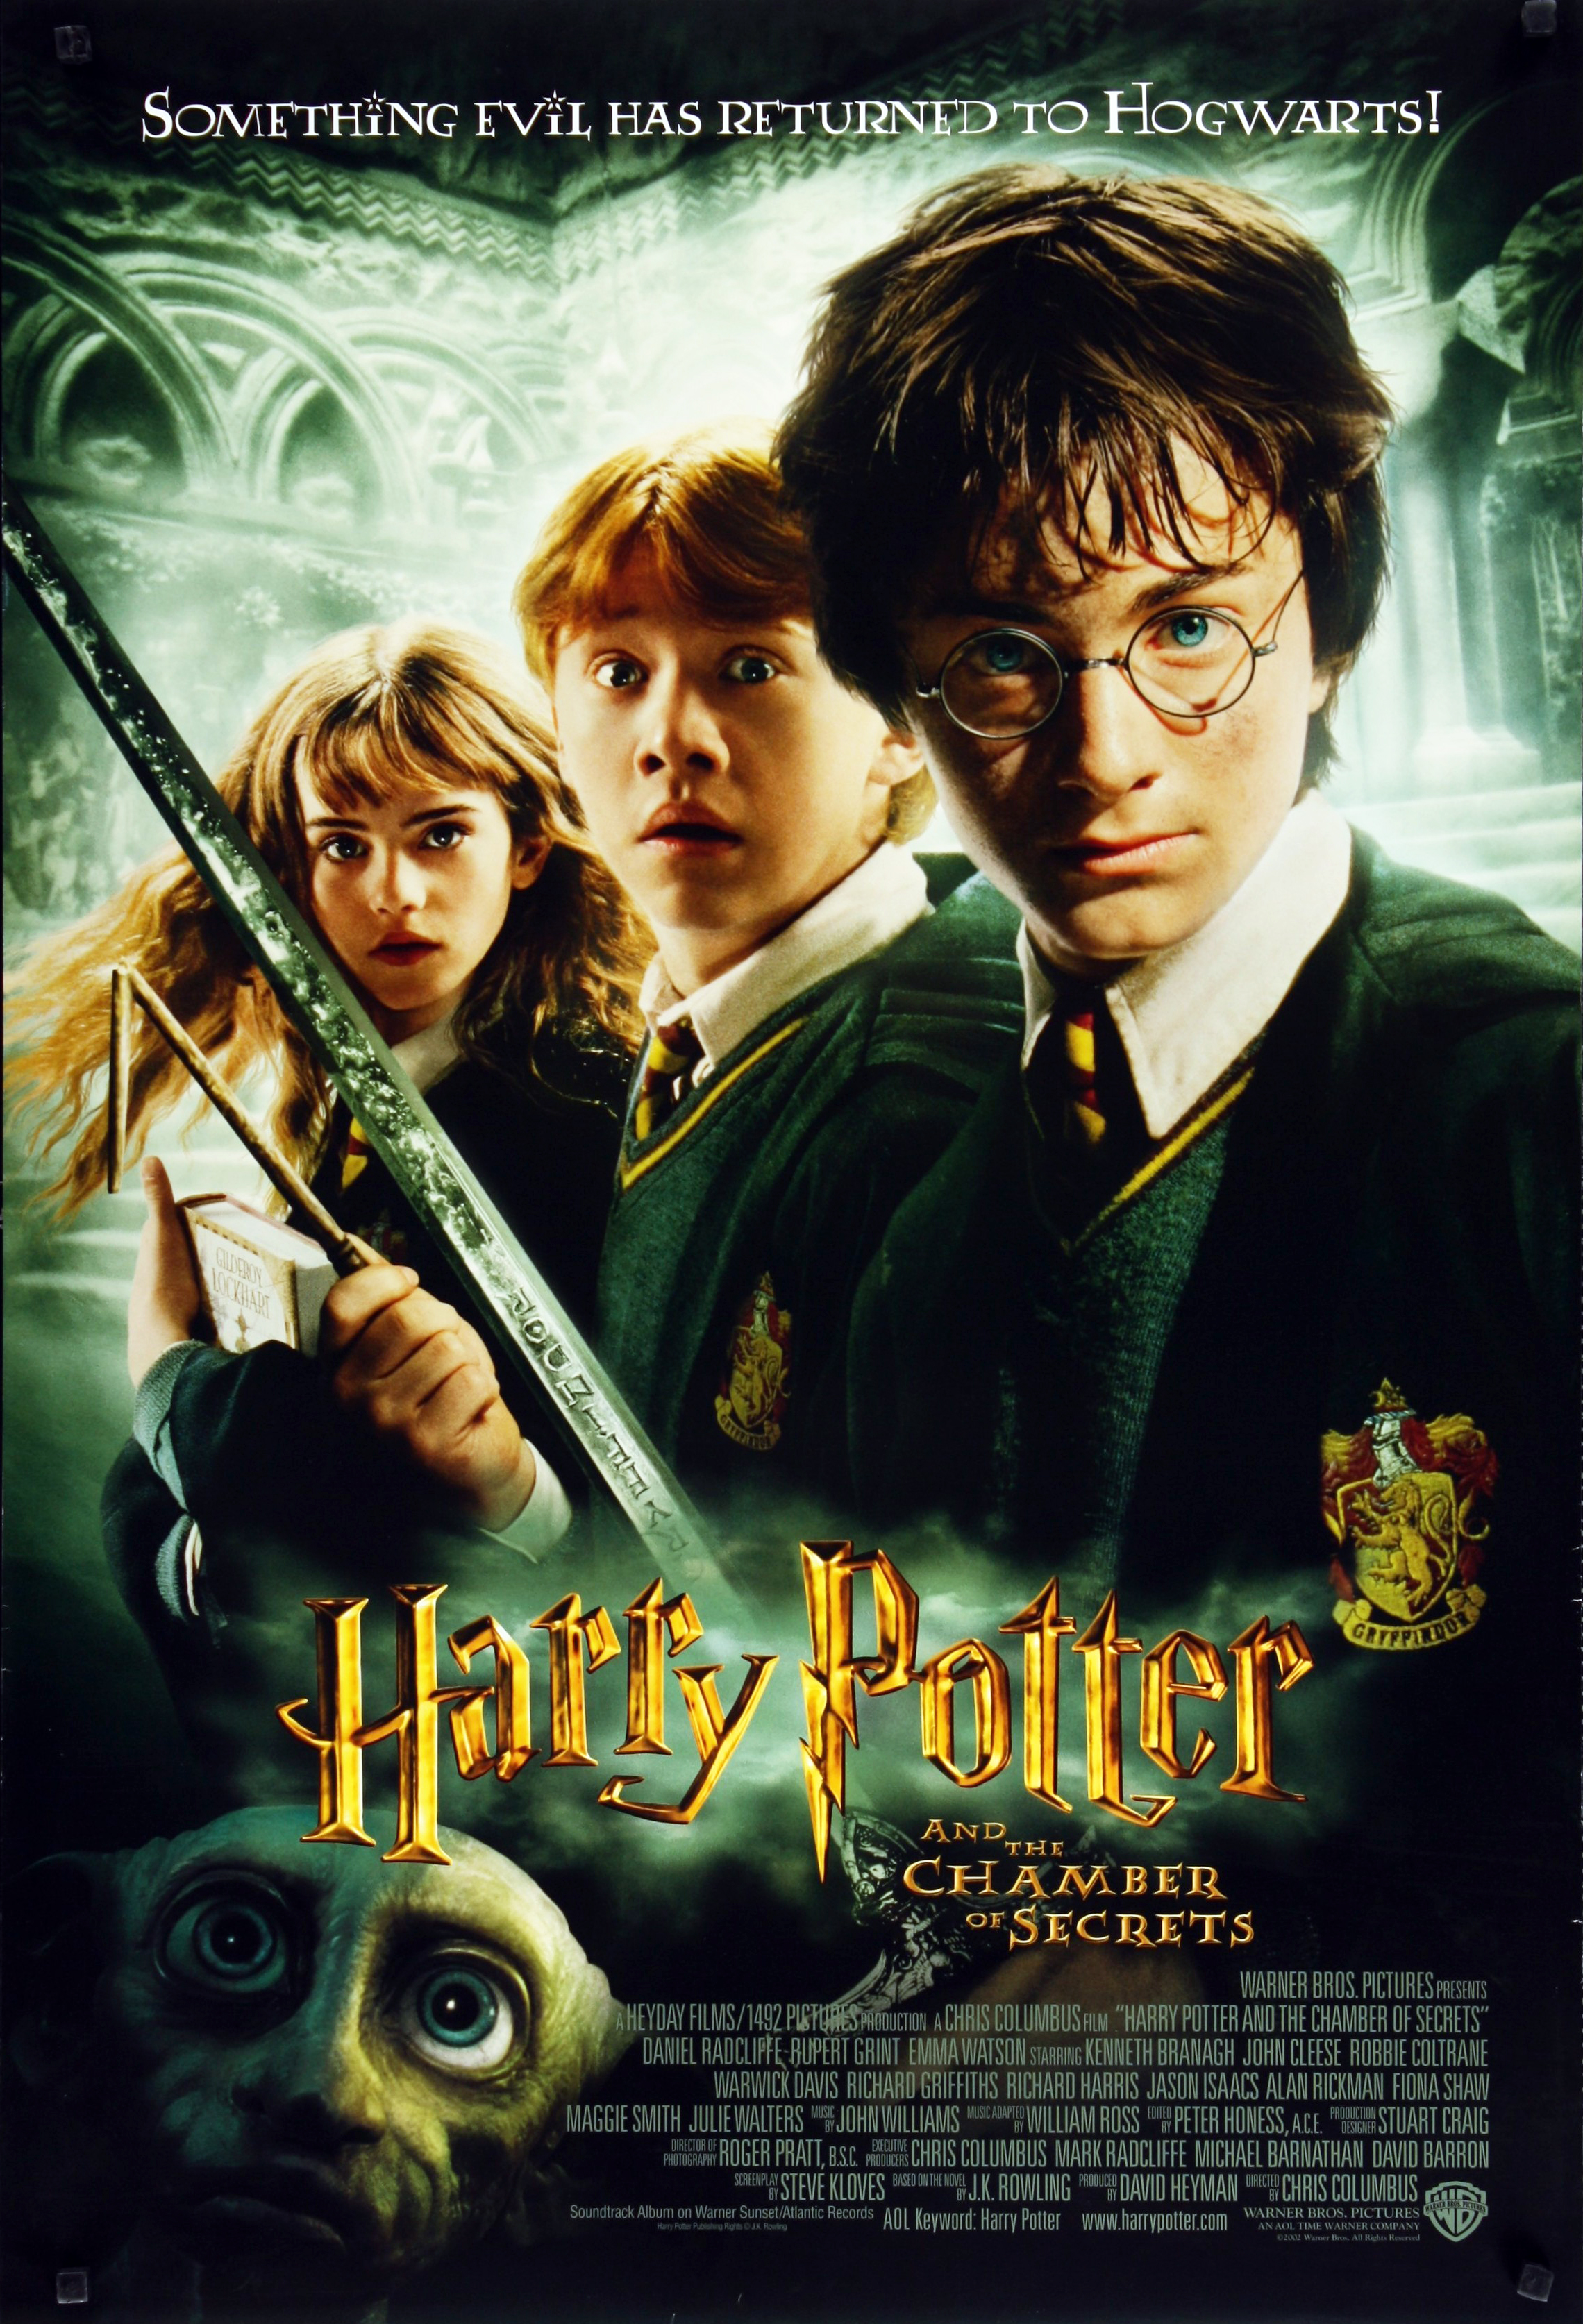 Harry Potter and the Chamber of Secrets (film) | Harry Potter Wiki ...